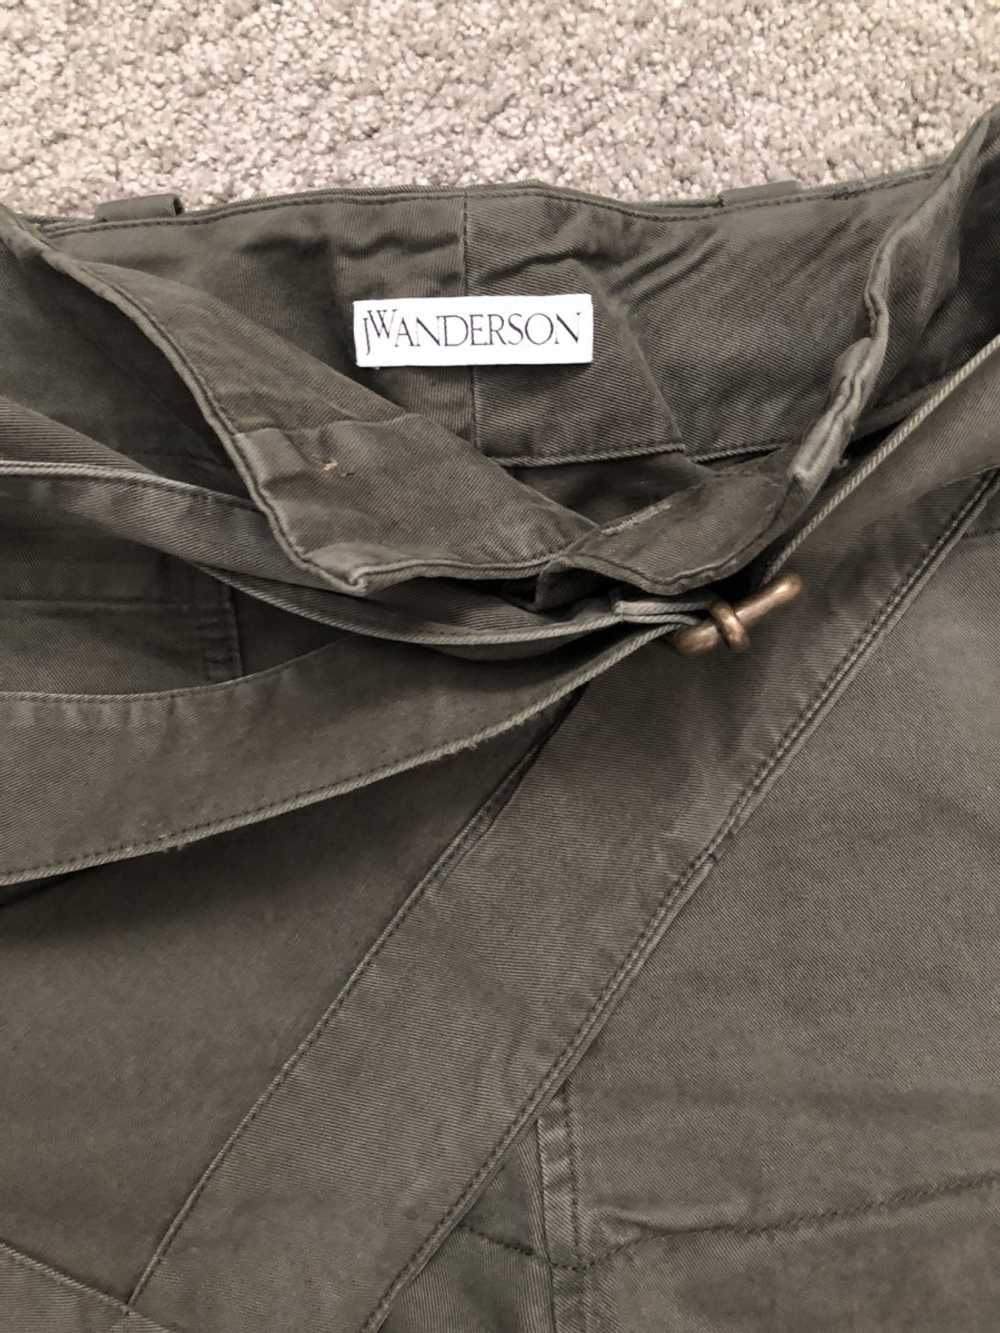 J.W.Anderson - Jw Anderson fold military cargo - image 2